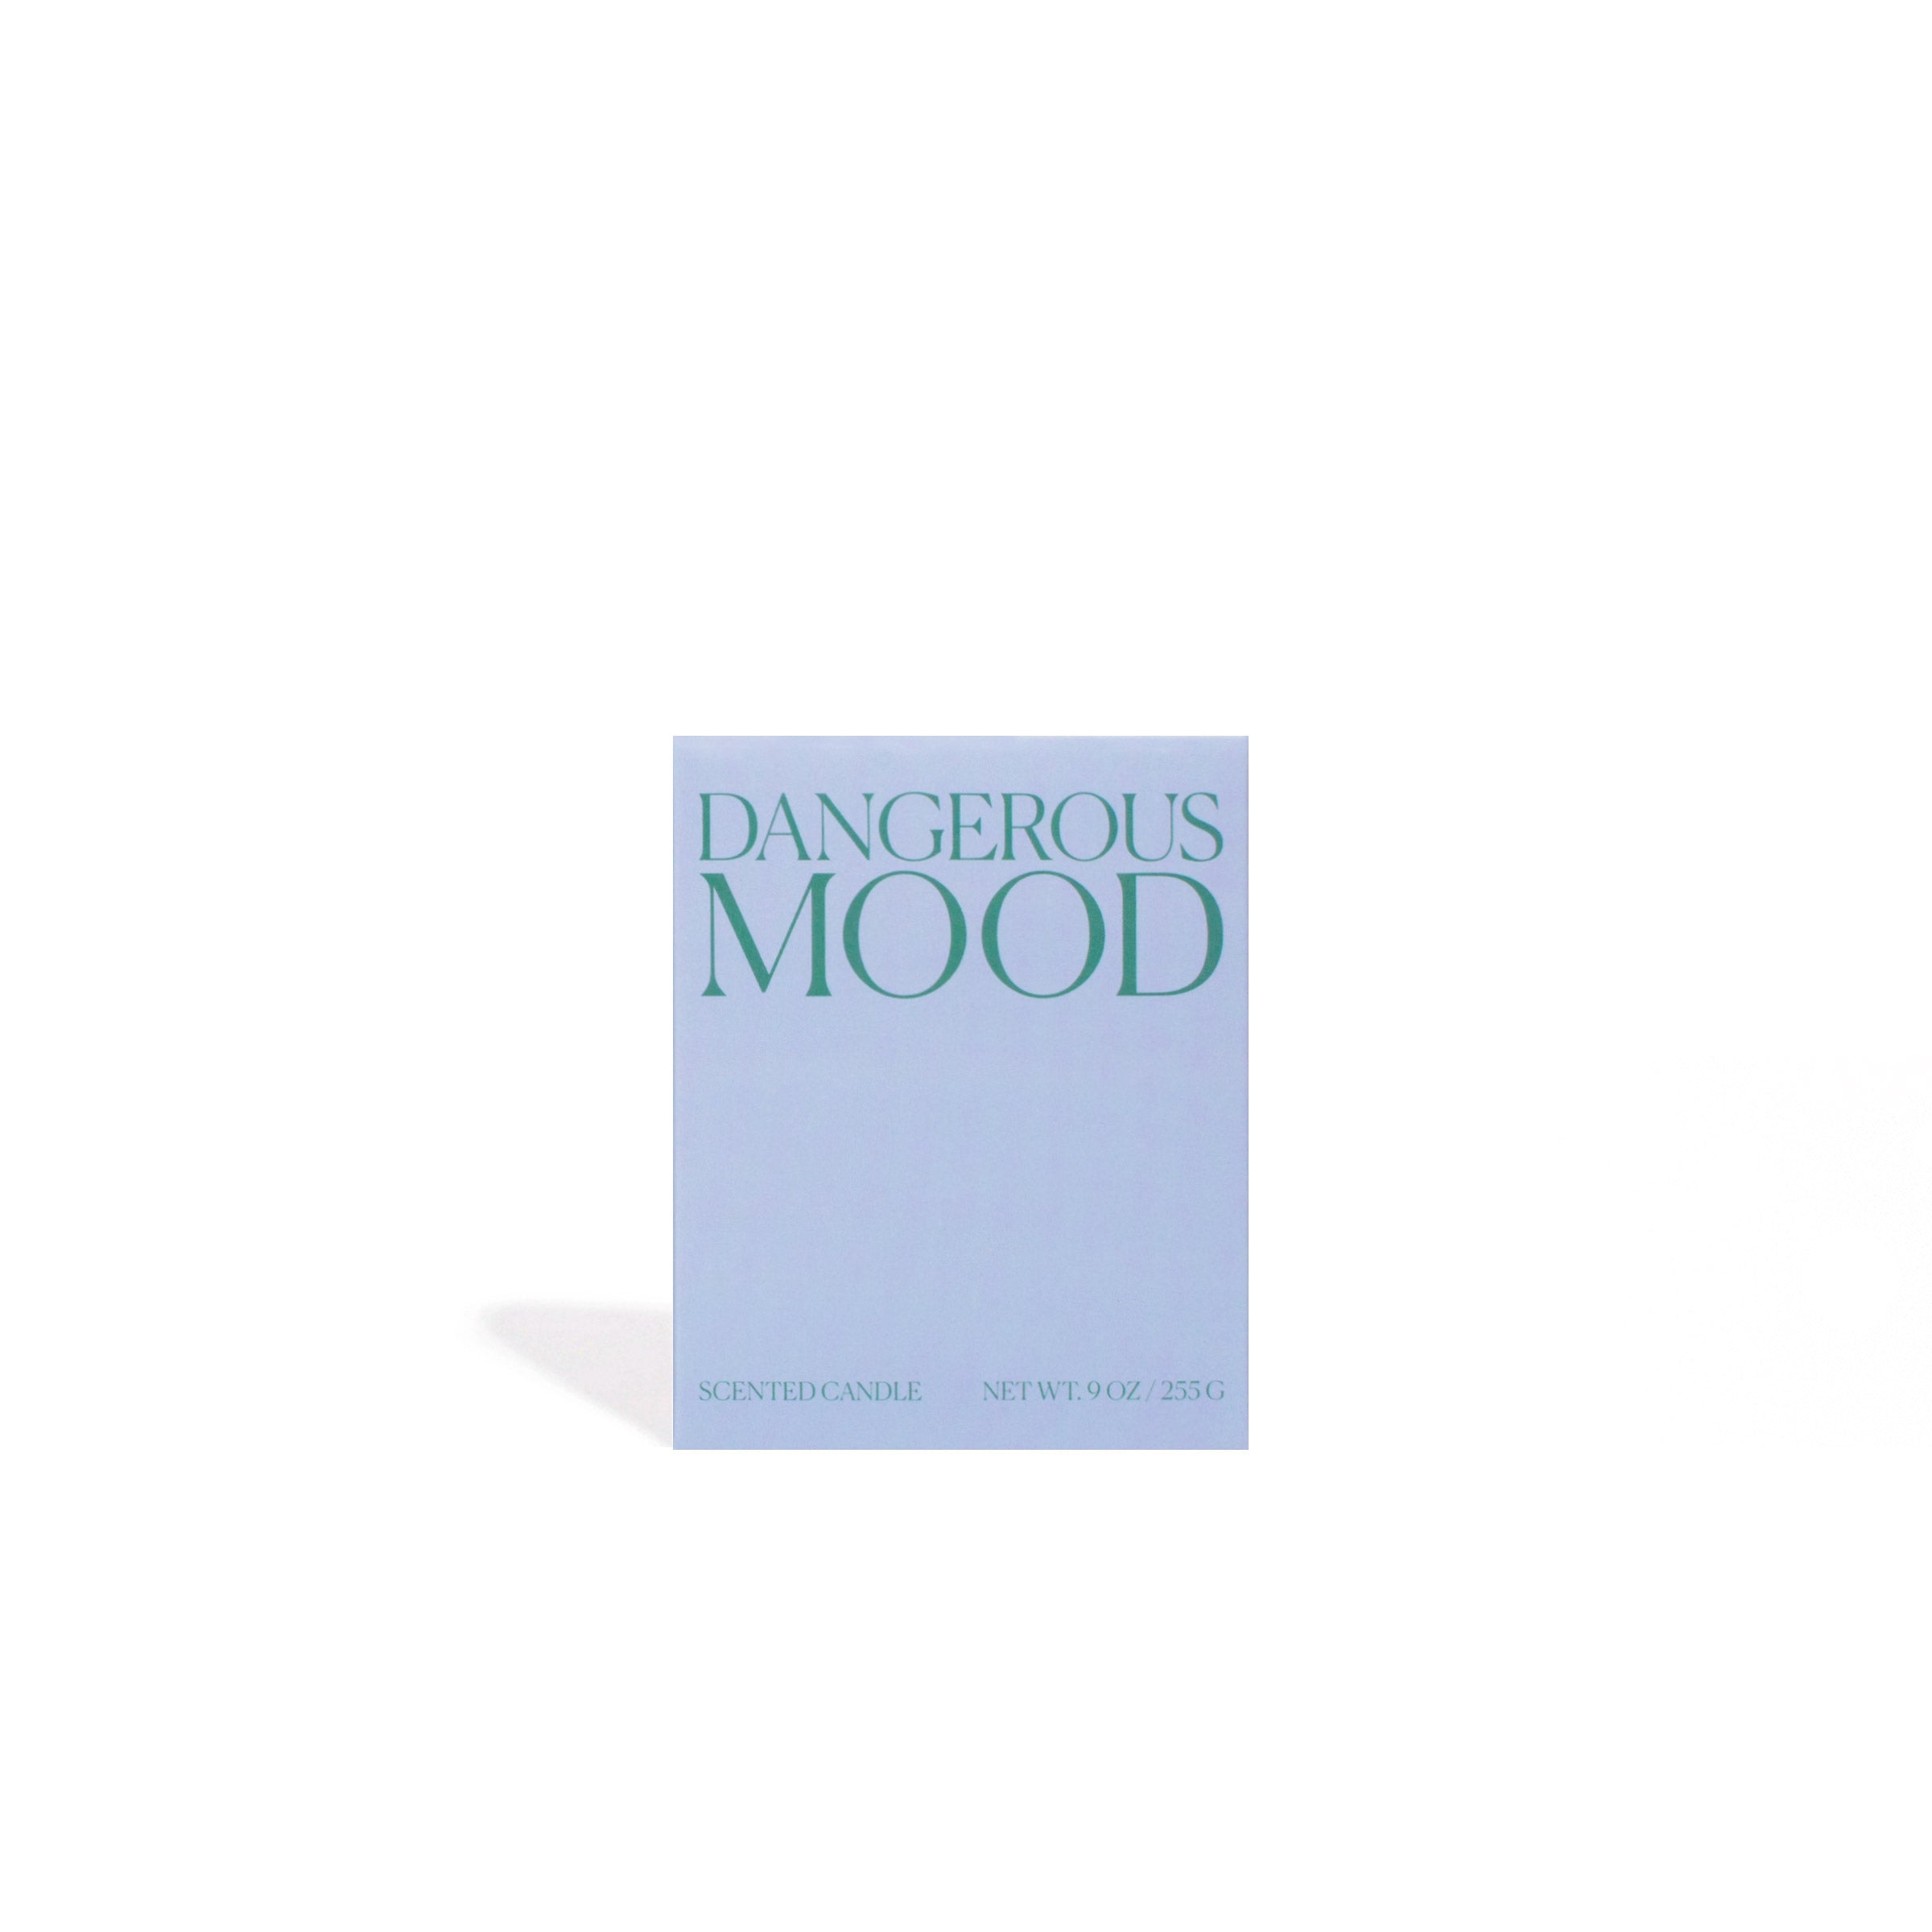 Dangerous Mood Candle by Piecework Puzzles